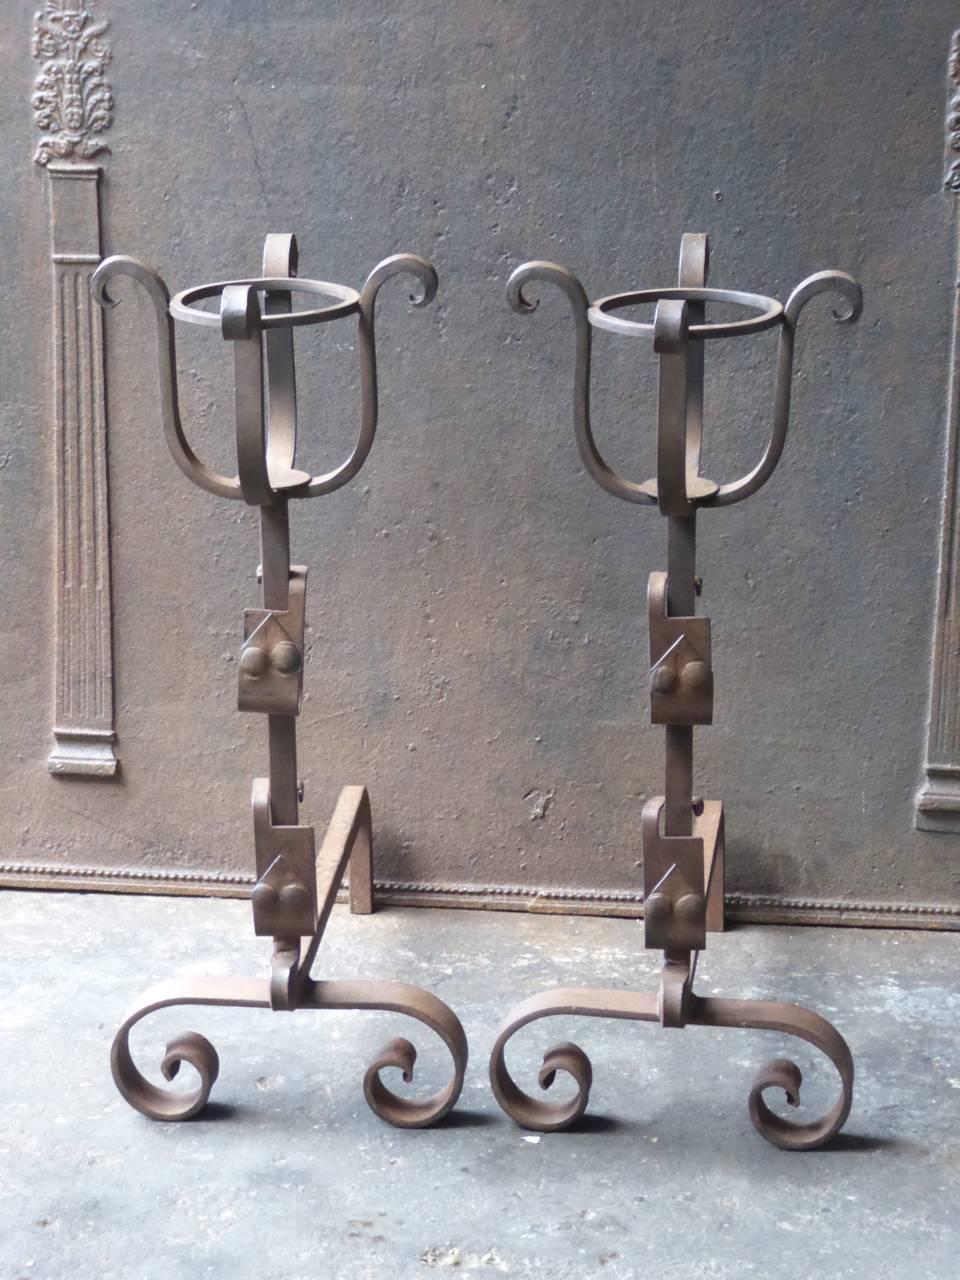 French wrought iron andirons with spit hooks to grill food and a cup to keep drinks or soup warm. The style is Napoleon III. 20th century.